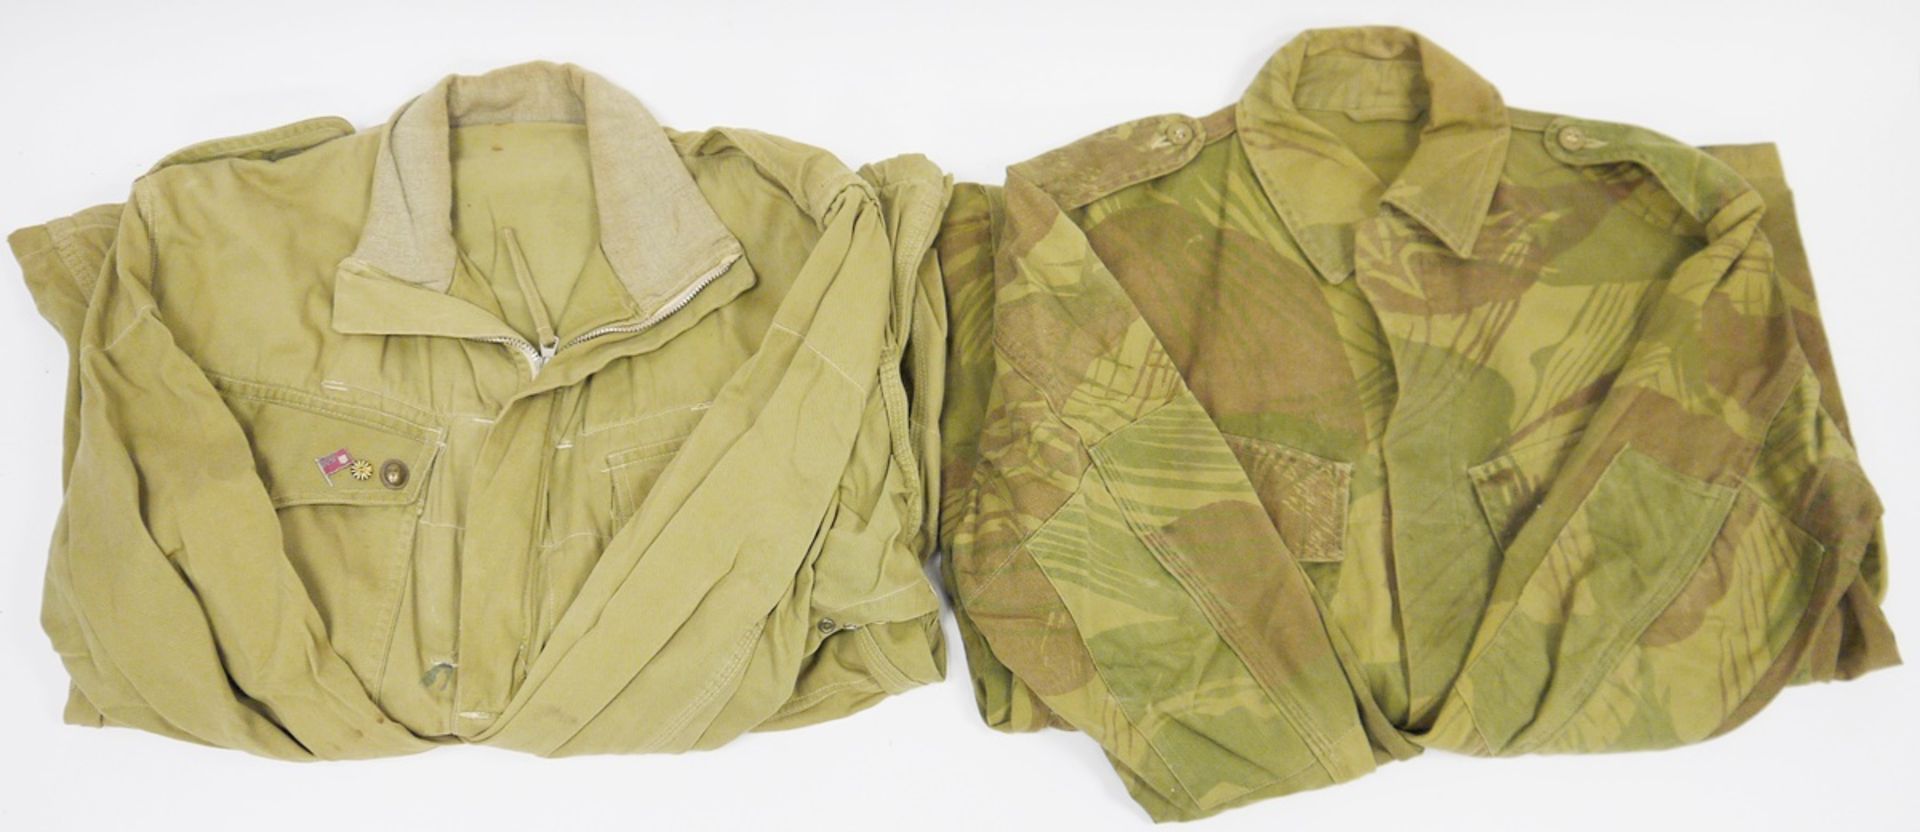 1950's Rhodesian combat jacket and a 1970's camouflage jacket (2)  Condition Report Photos uploaded - Image 4 of 6